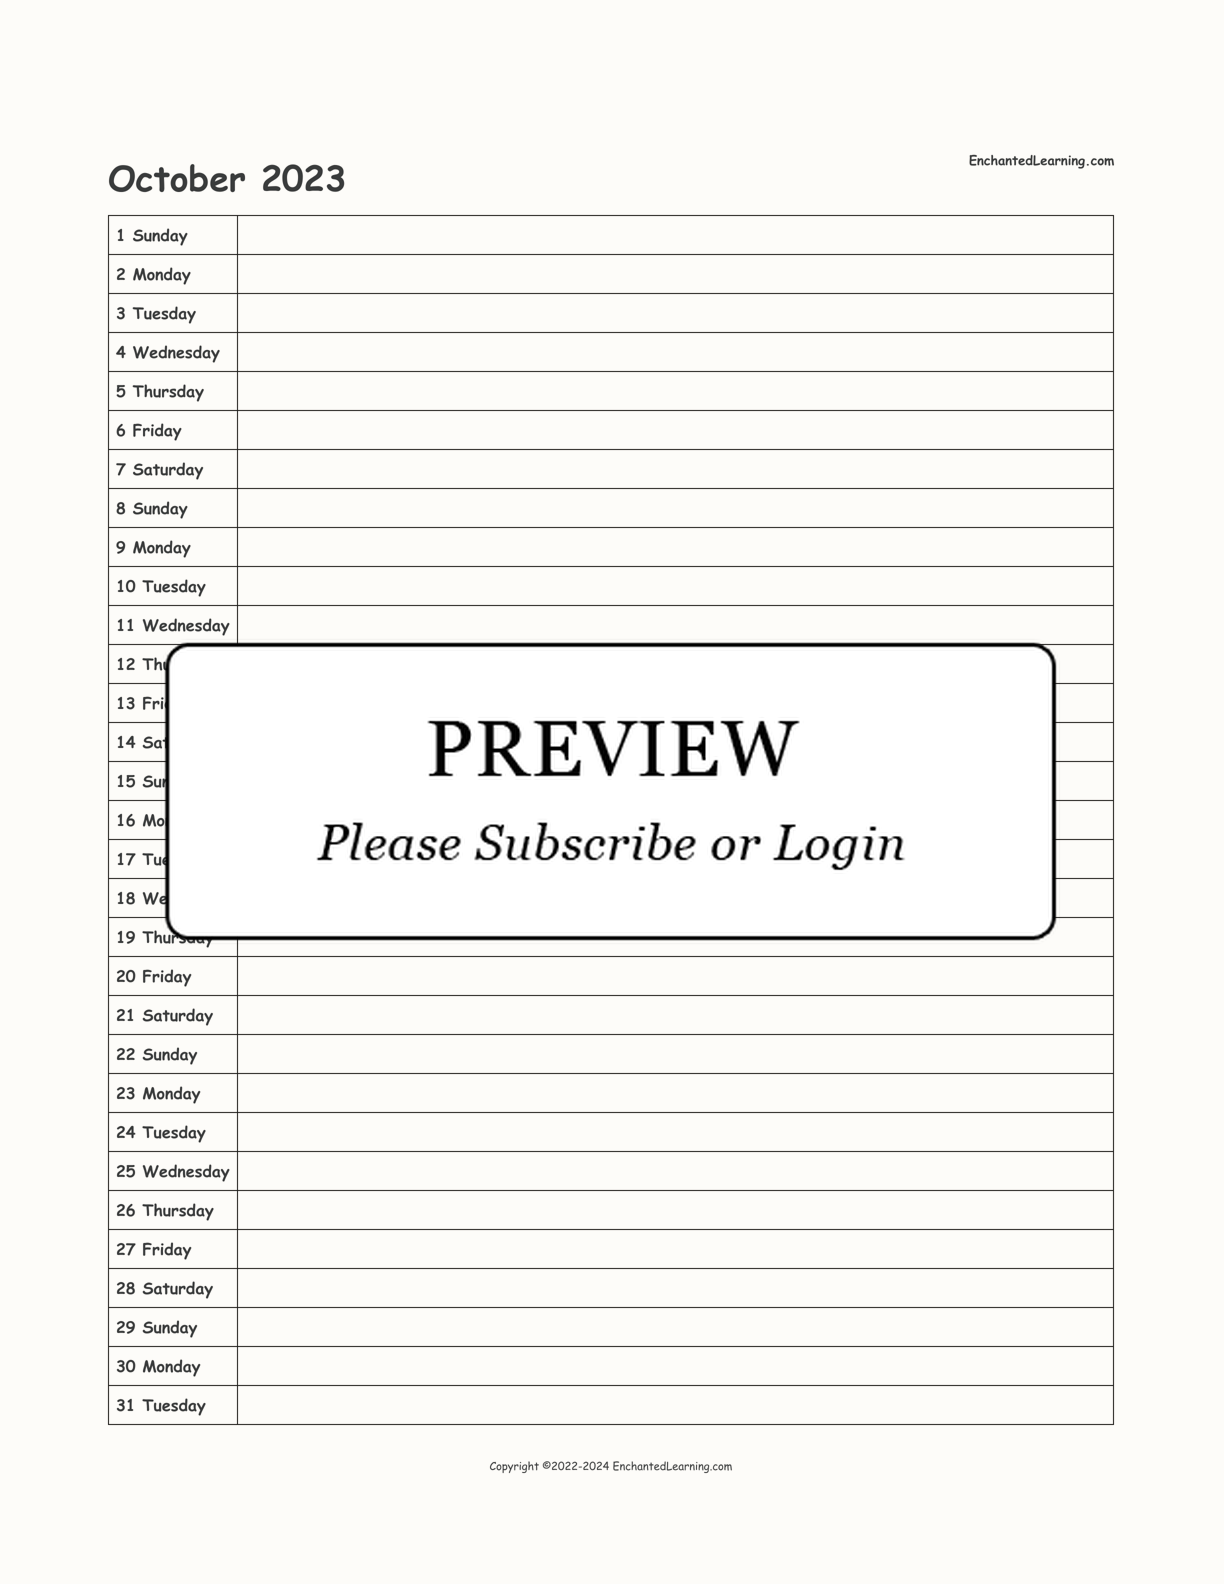 2023 Scheduling Calendar interactive printout page 10